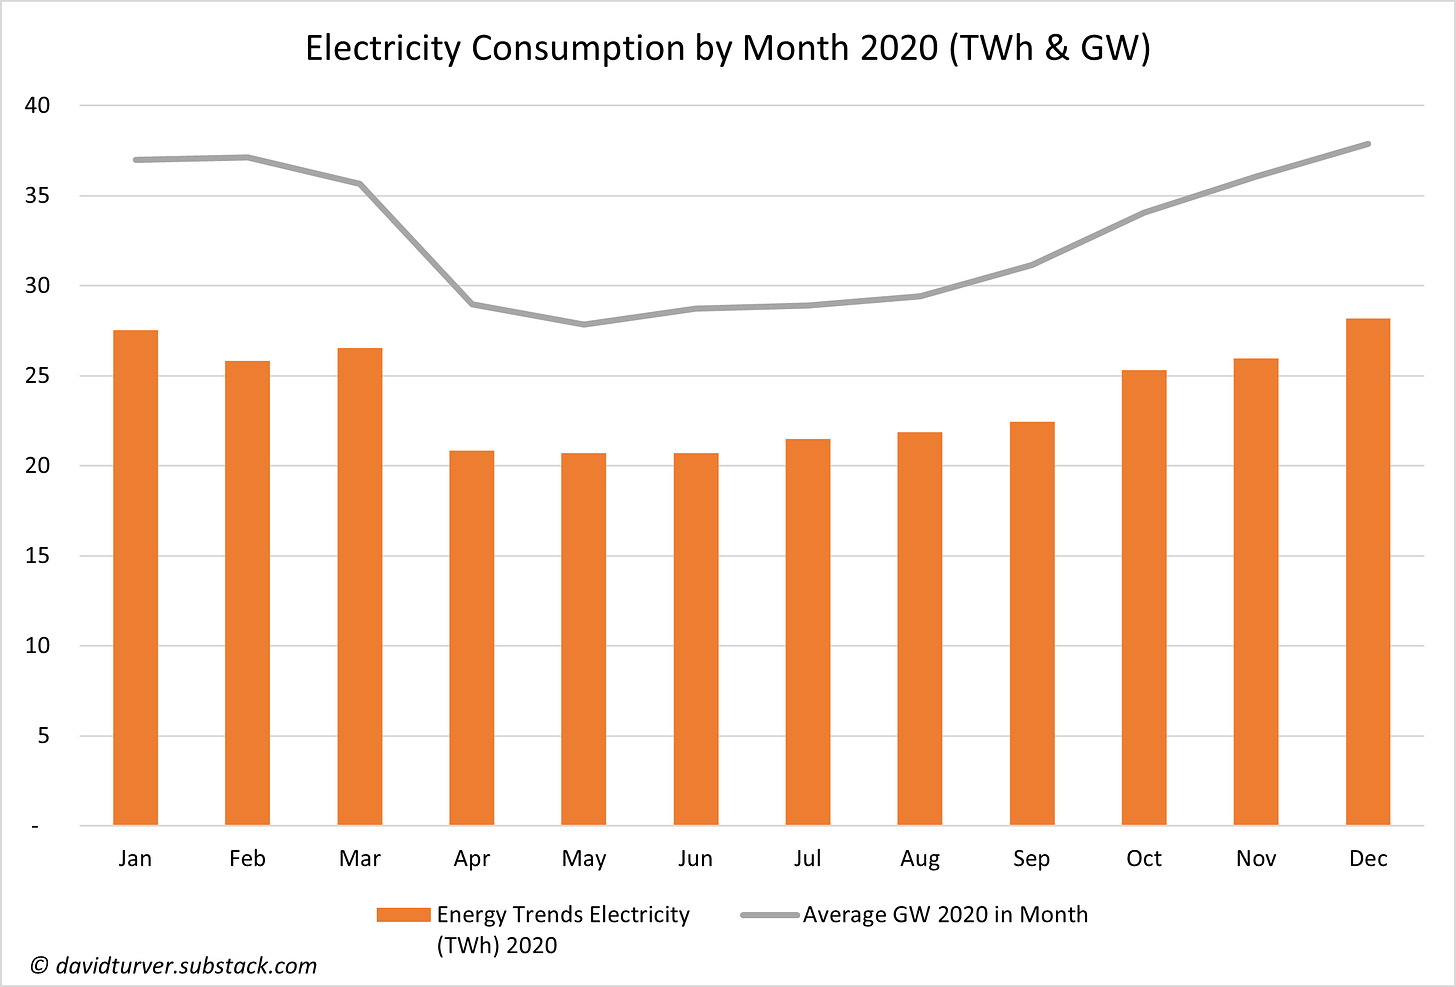 Figure 3 - Electricity Consumption by Month 2020 from Energy Trends